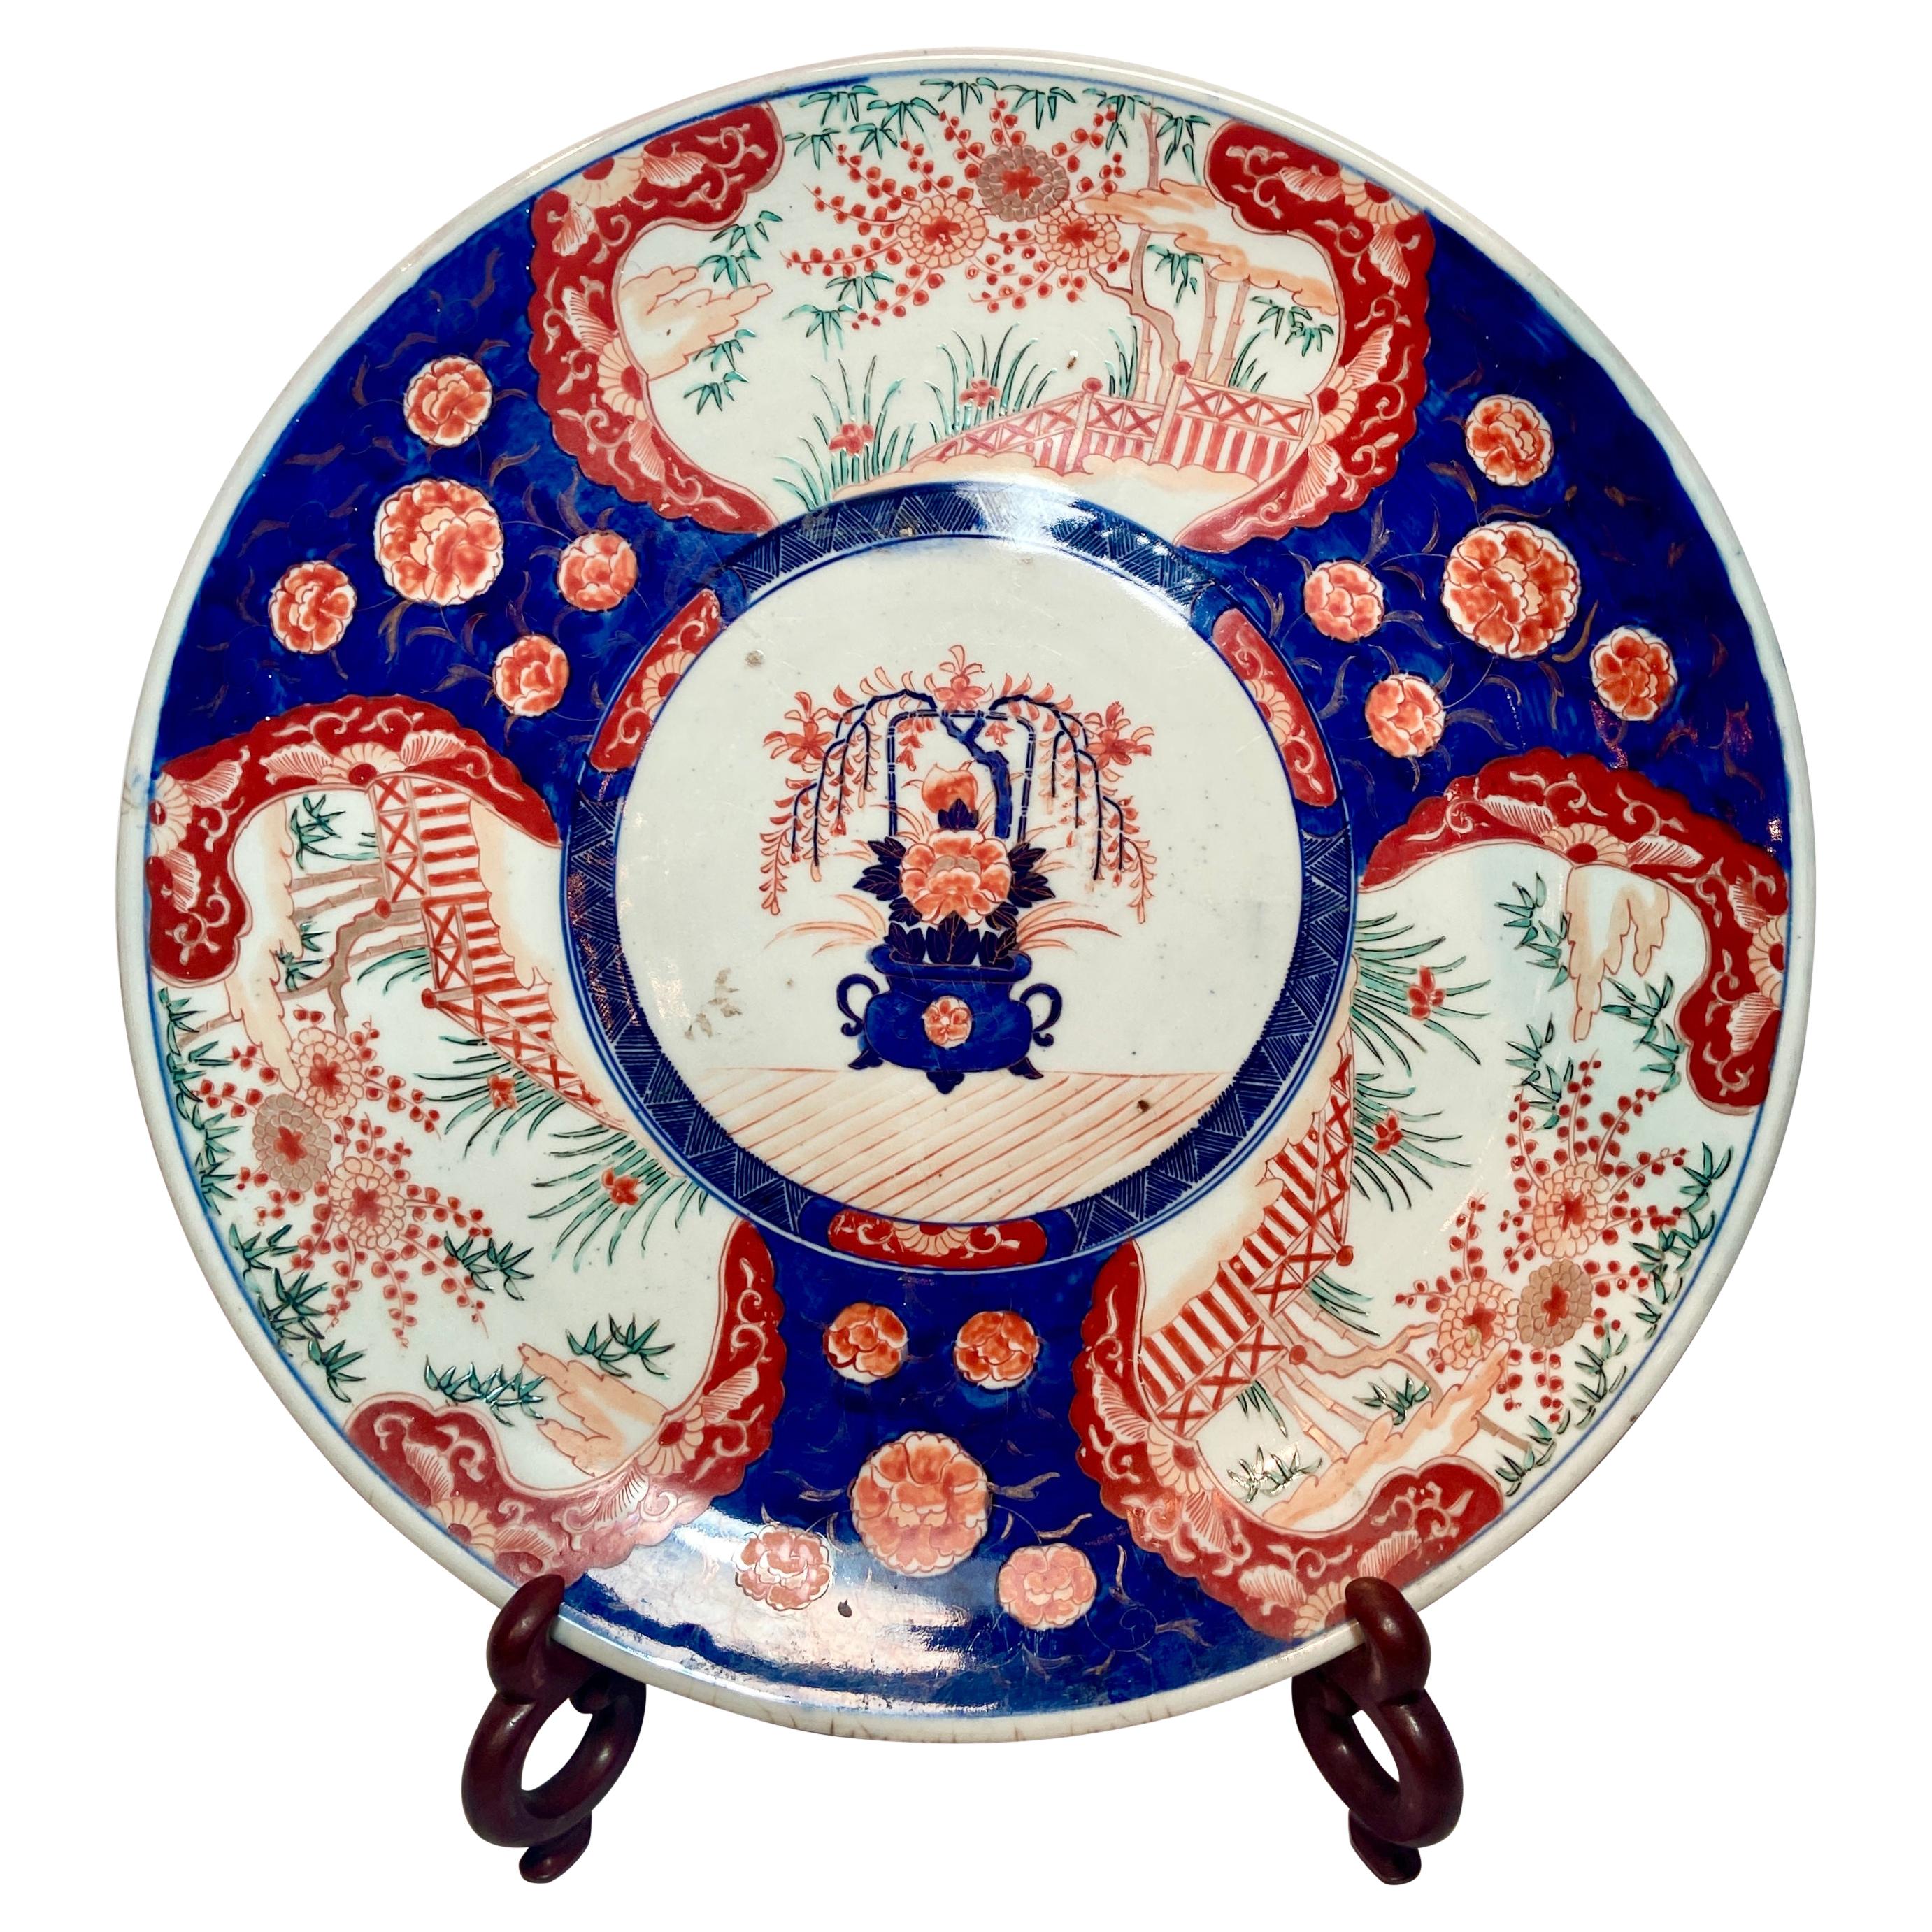 Antique 19th Century Japanese "Imari" Porcelain Plate on Stand For Sale